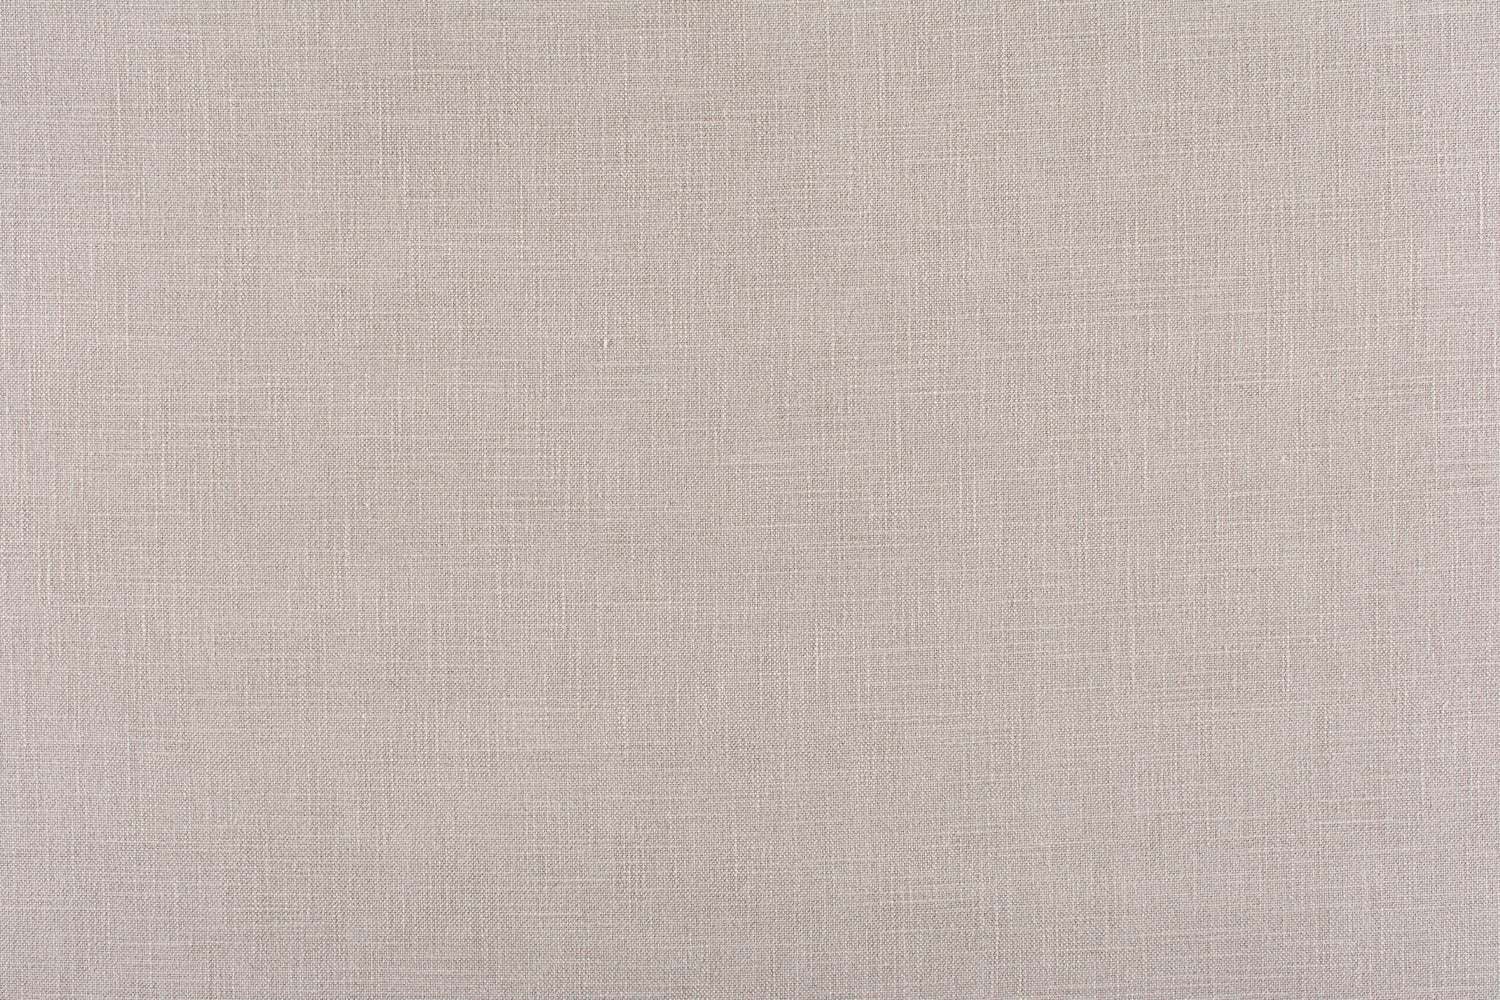 Stonewash fabric in nickel color - pattern number H8 0005406T - by Scalamandre in the Old World Weavers collection